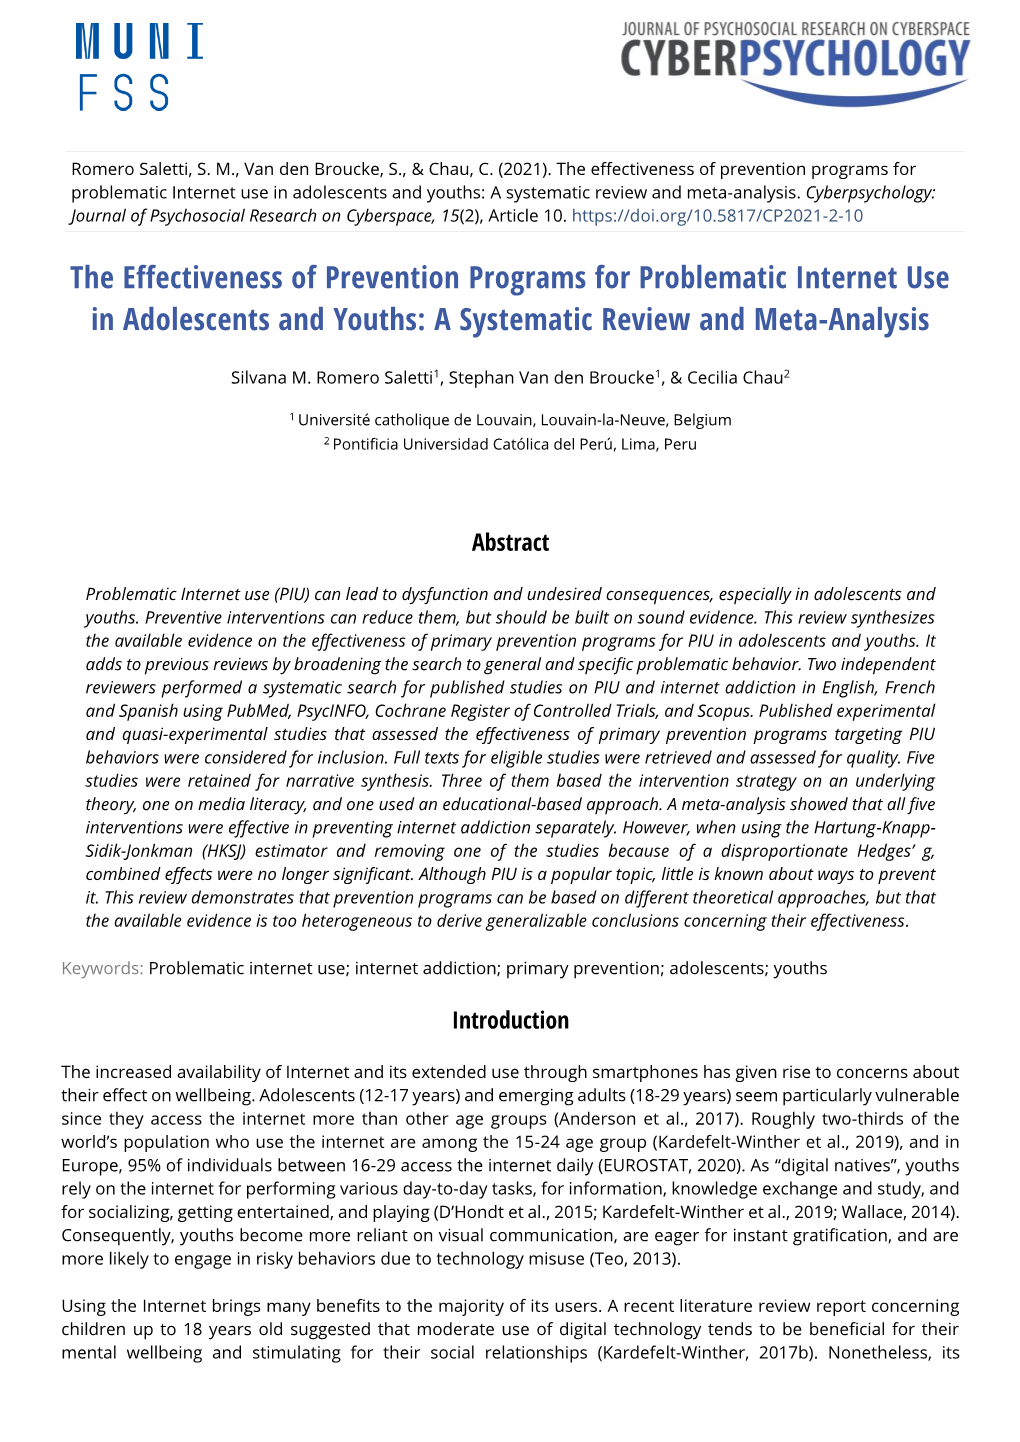 The Effectiveness of Prevention Programs for Problematic Internet Use in Adolescents and Youths: a Systematic Review and Meta-Analysis